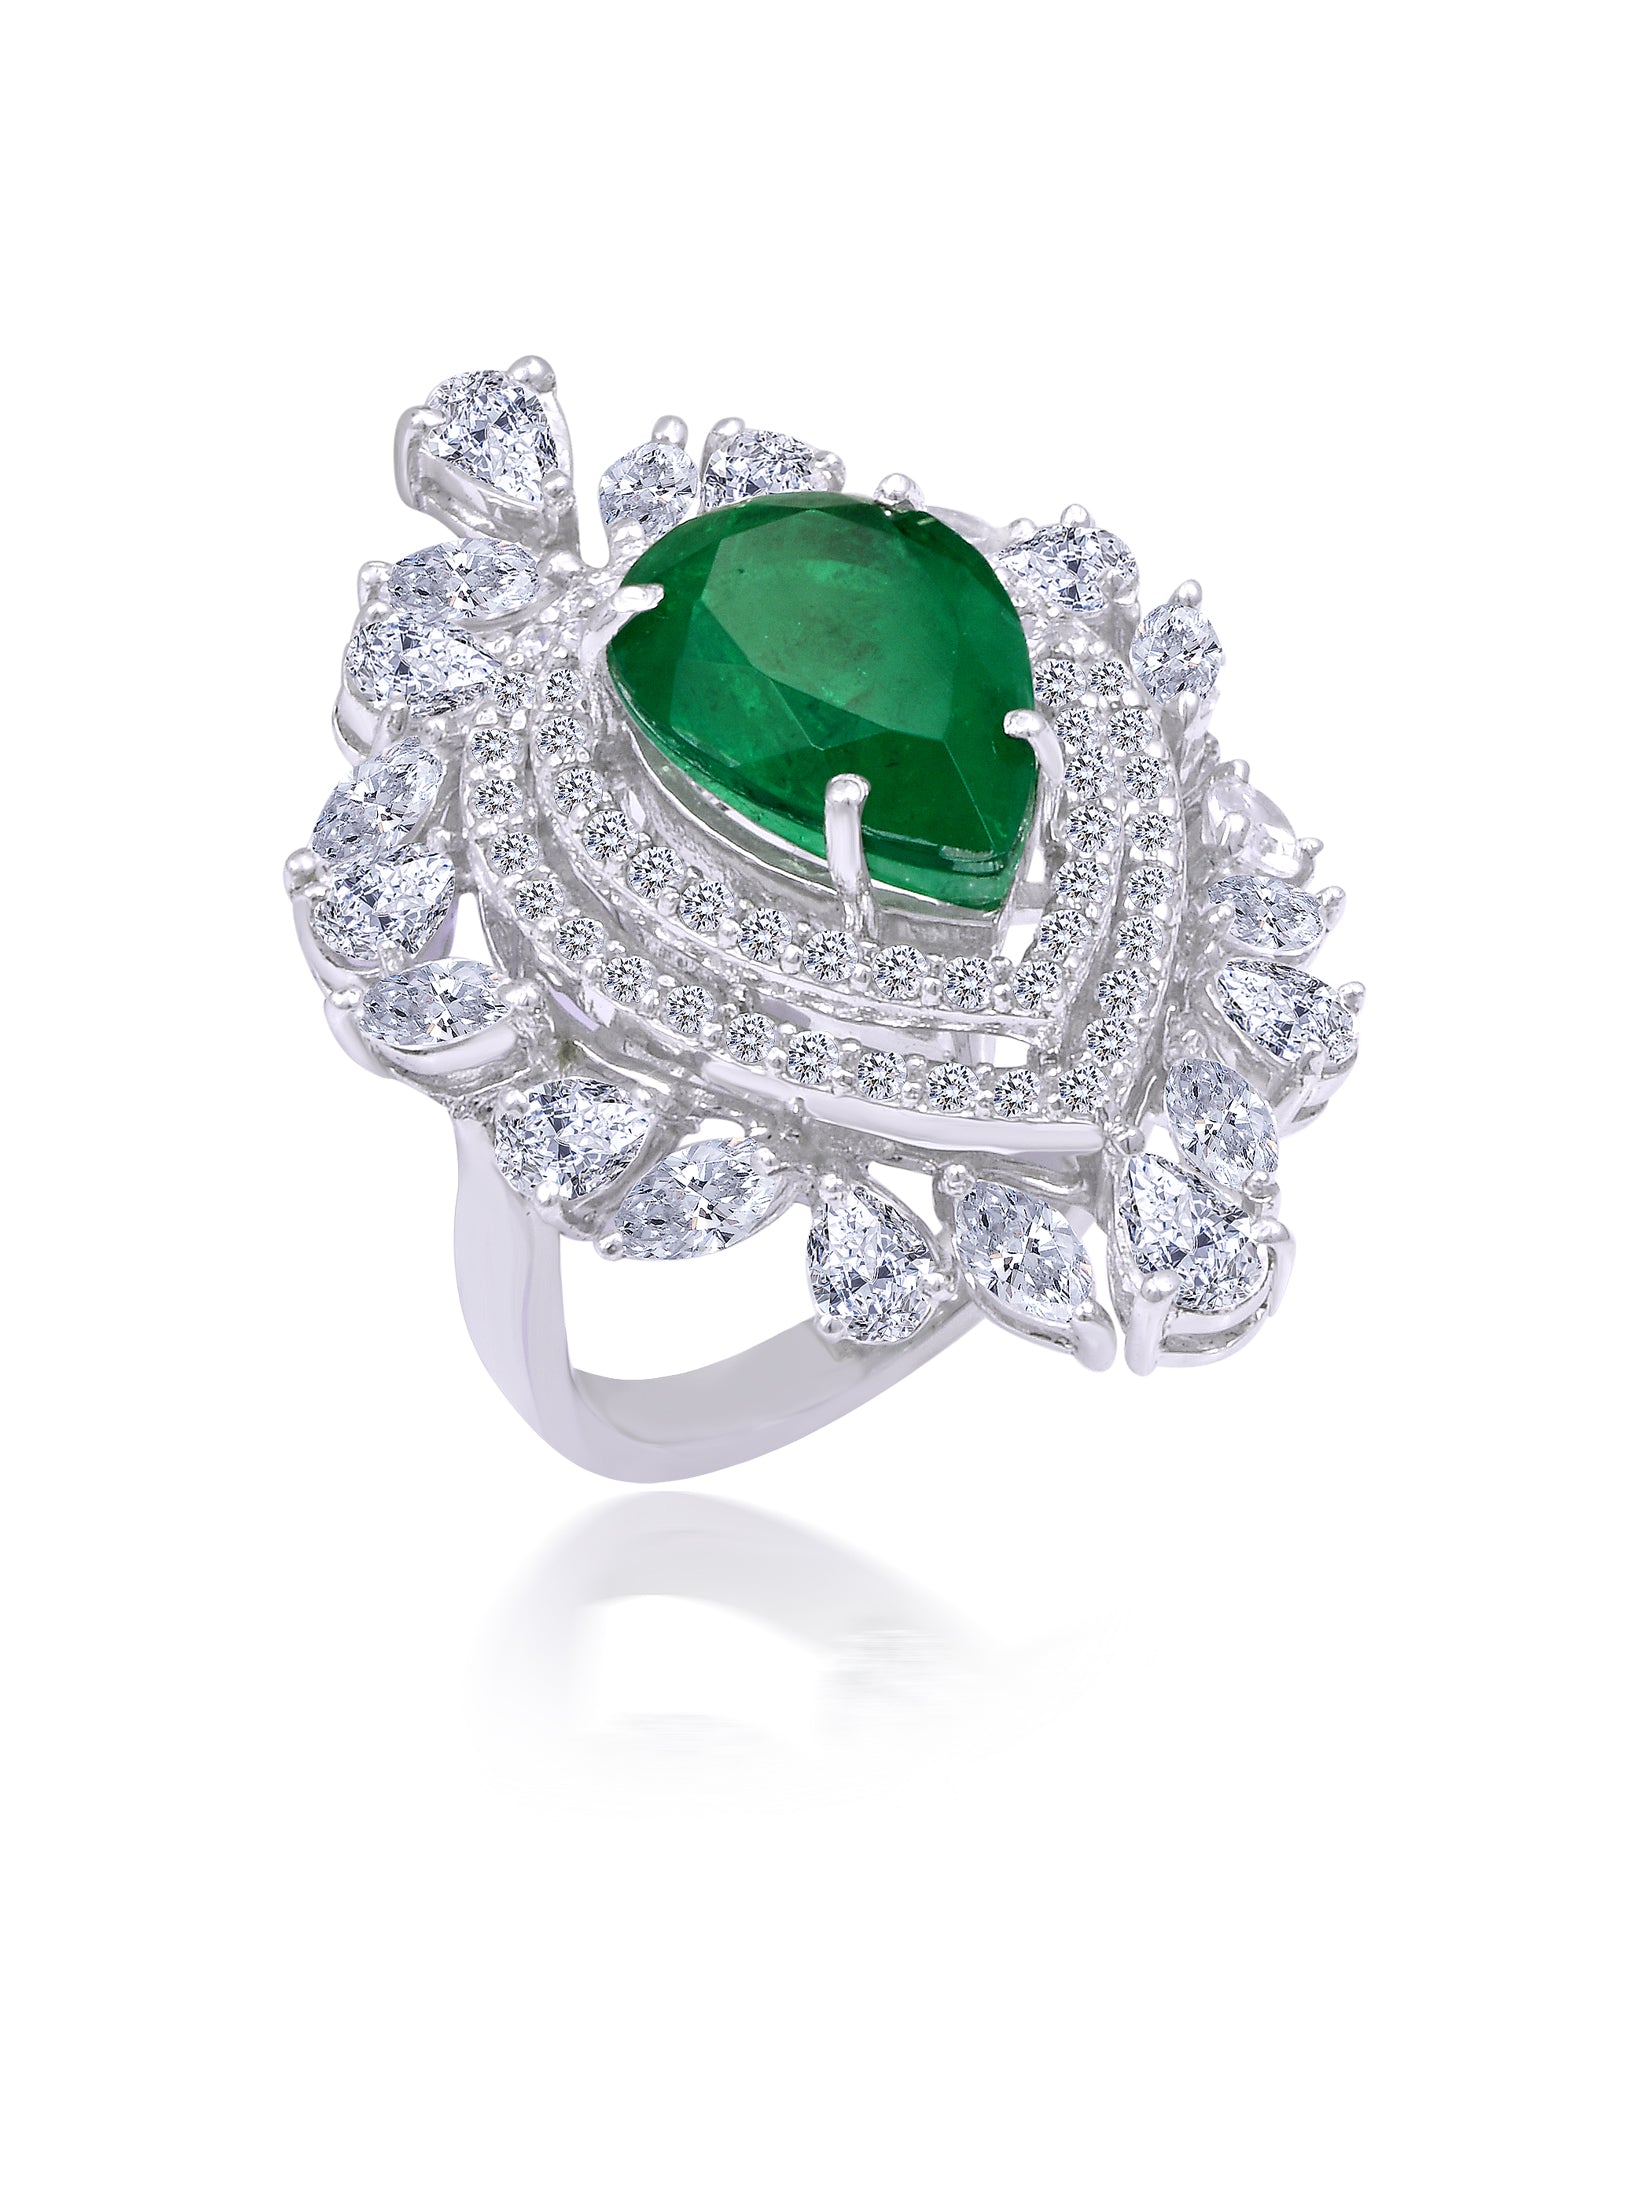 Green and White Cocktail Ring